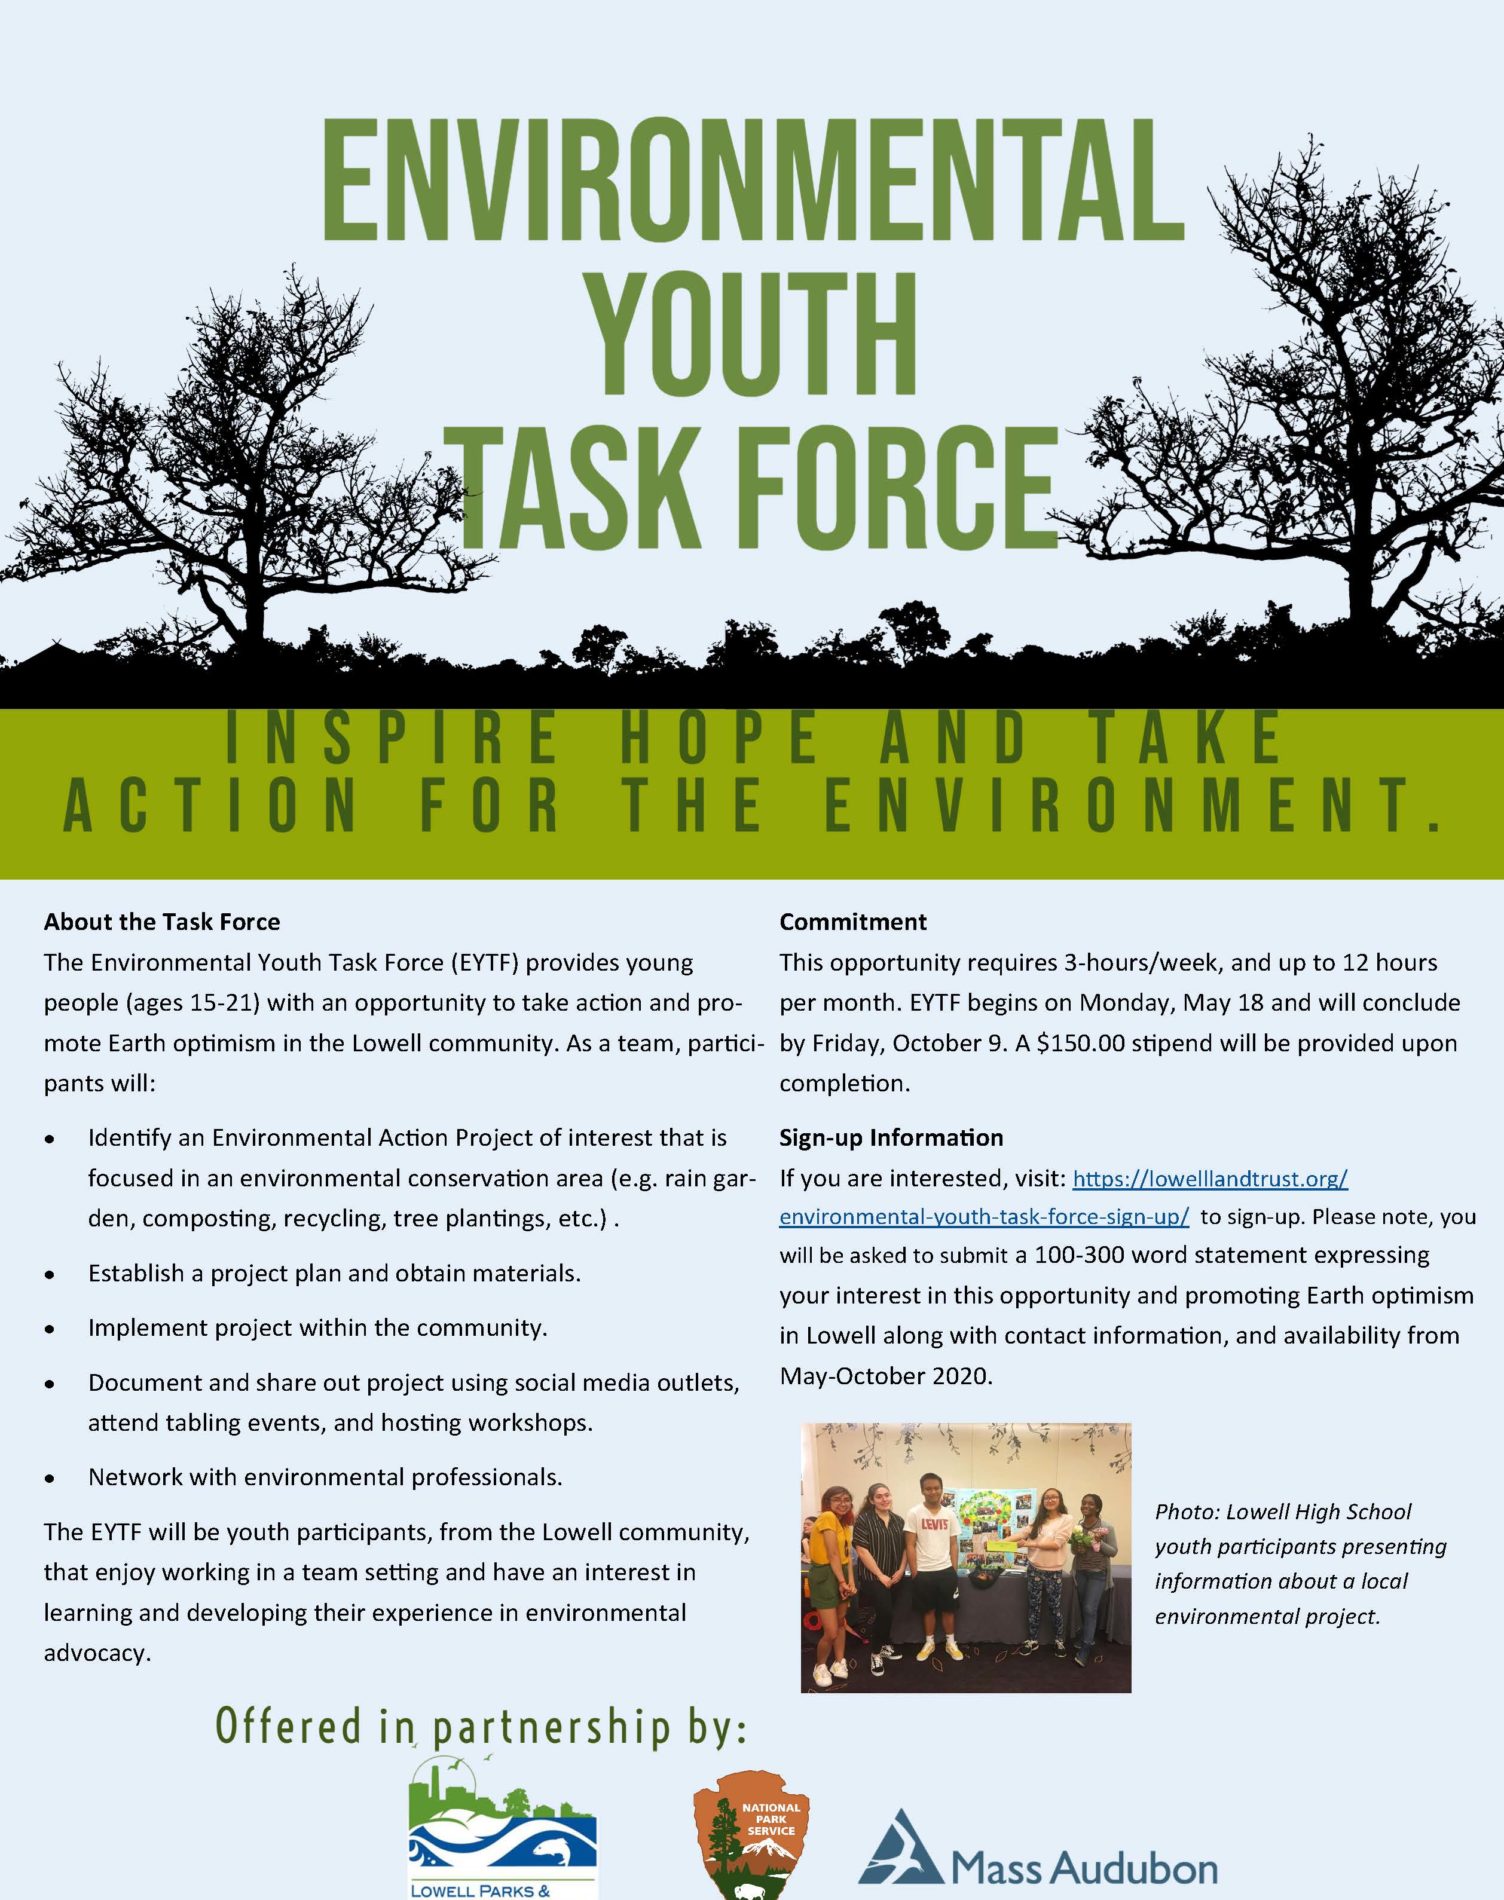 Lowell Parks & Conservation TrustEnvironmental Youth Task Force 